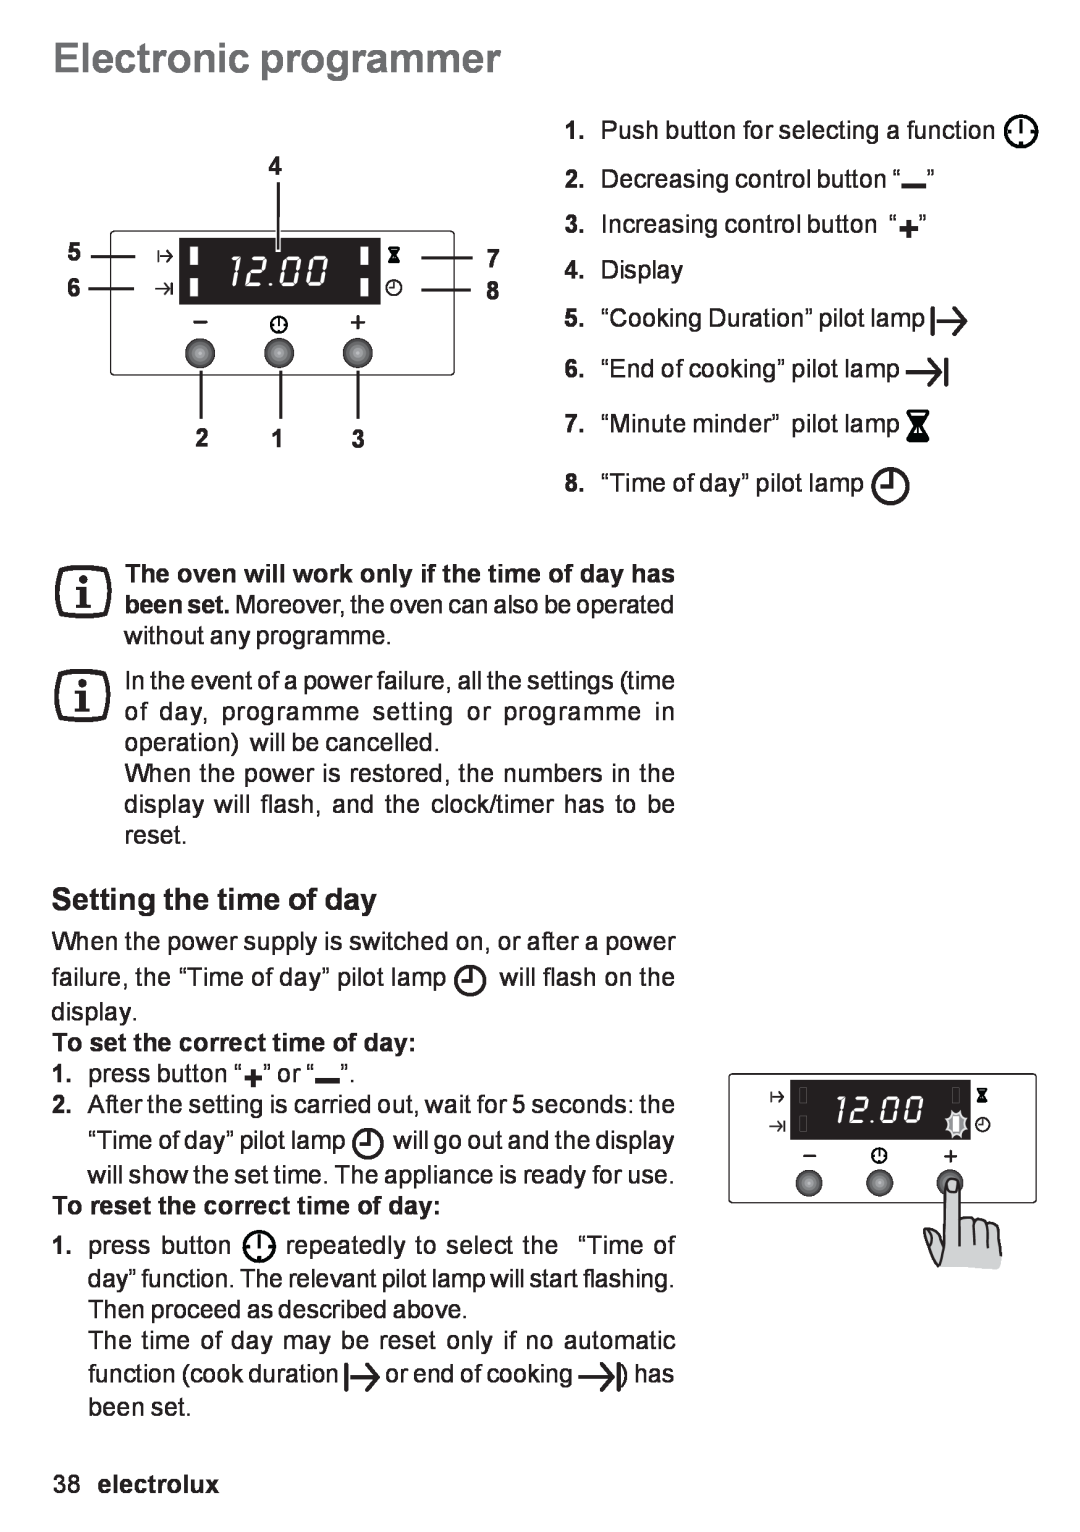 Electrolux EOB 53003 user manual Electronic programmer, Setting the time of day, To set the correct time of day, electrolux 